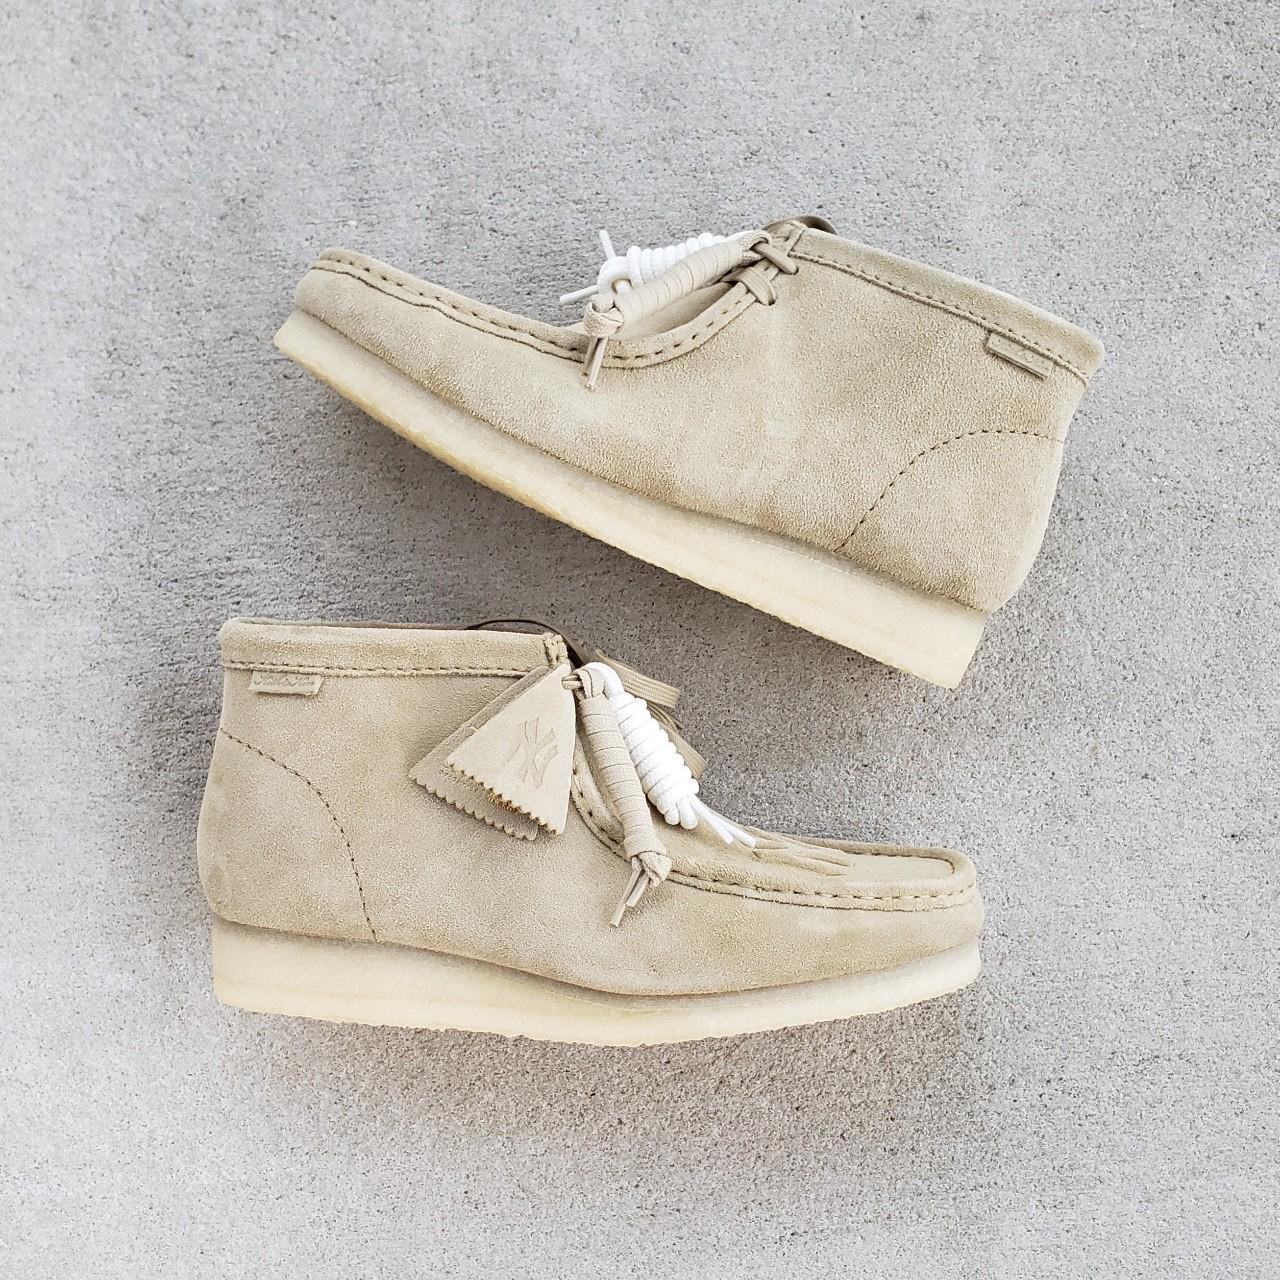 Kith & Clarks for New York Yankees Wallabee Boot - Maple Suede 8